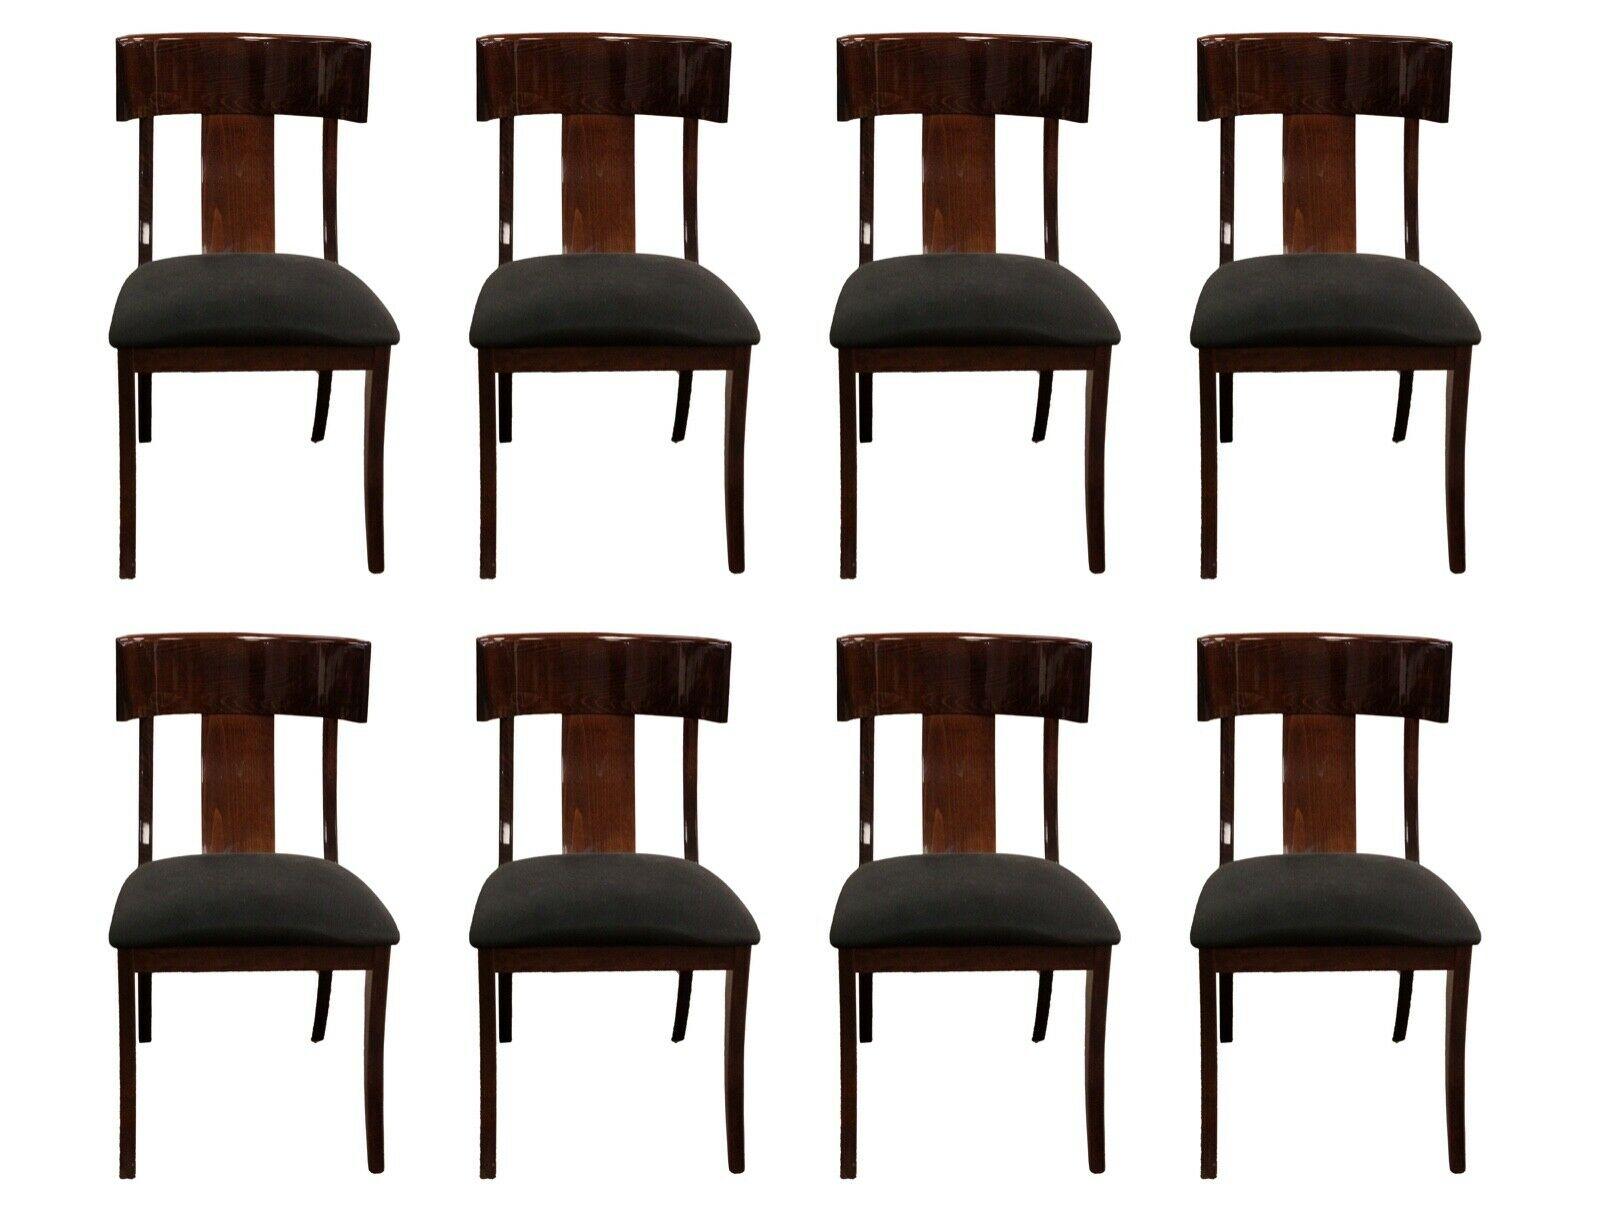 Post-Modern Pietro Costantini for Ello Wood Lacquered Dining Table 8 Chairs & Credenza